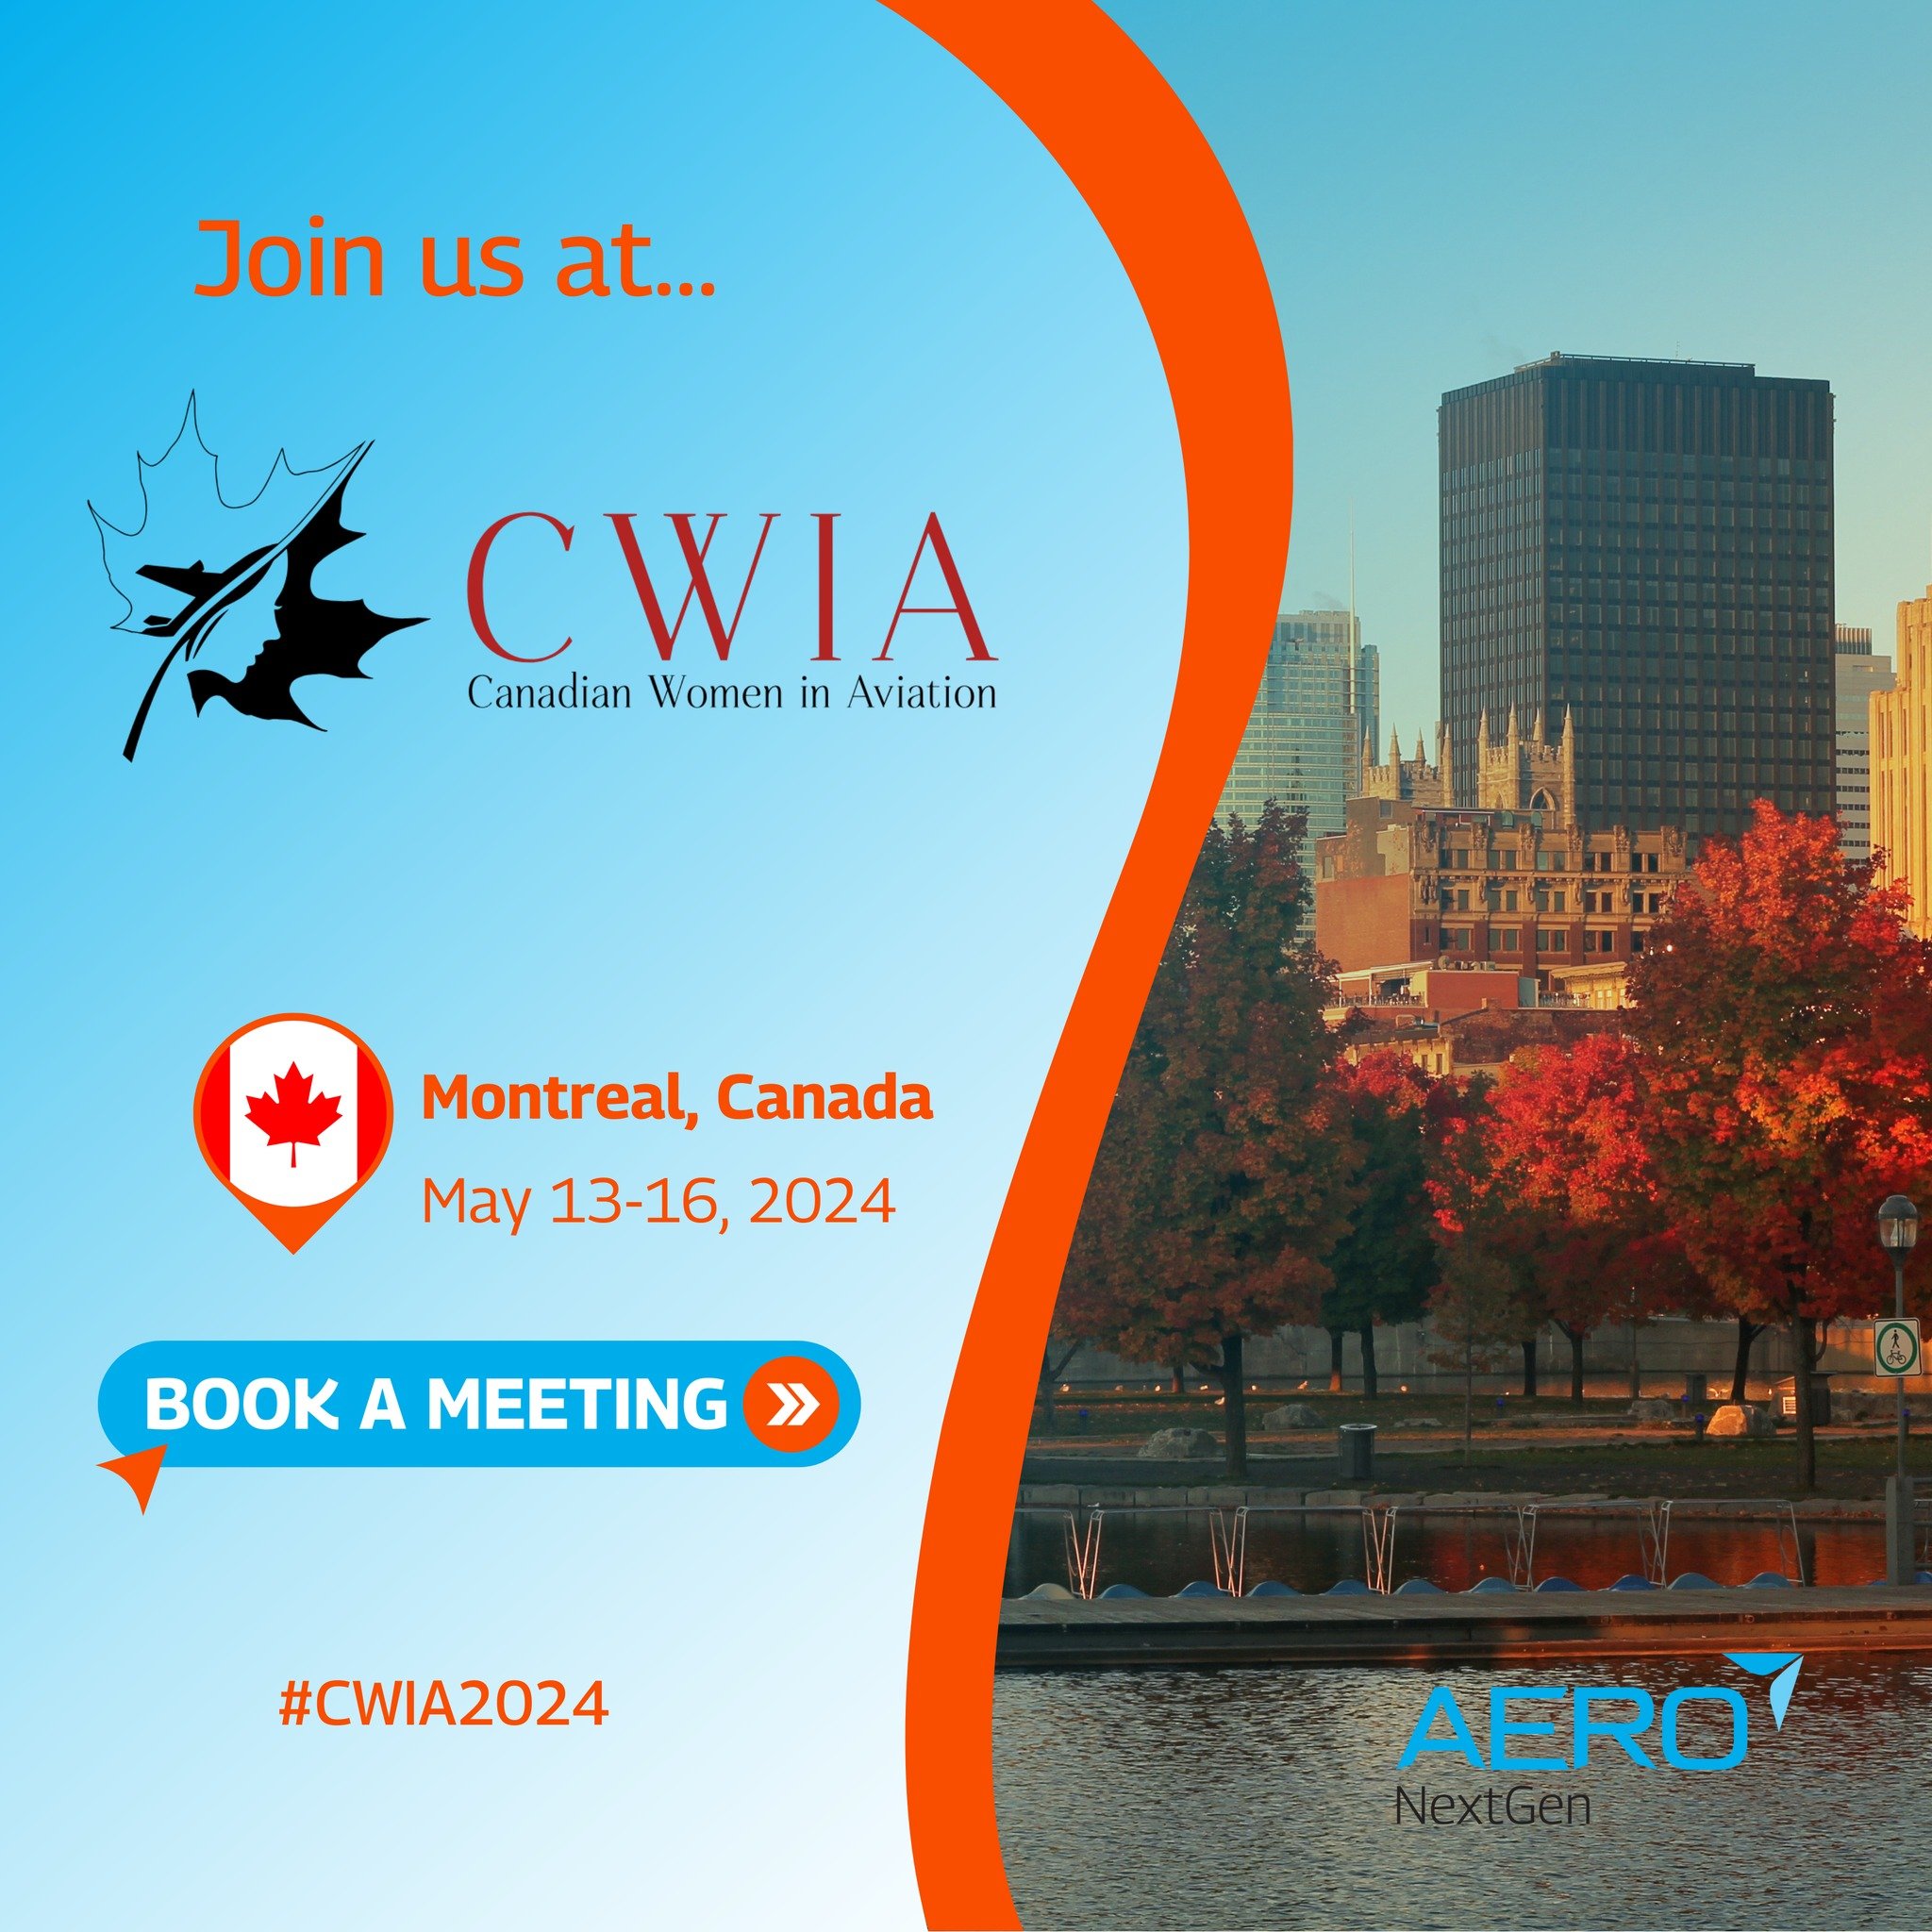 🌟✈️ Join Aero NextGen at the Canadian Women in Aviation Conference! ✈️🌟

Mark your calendars! Aero NextGen is excited to announce our participation in the upcoming Canadian Women in Aviation Conference, happening in Montreal from May 13-16, 2024. T